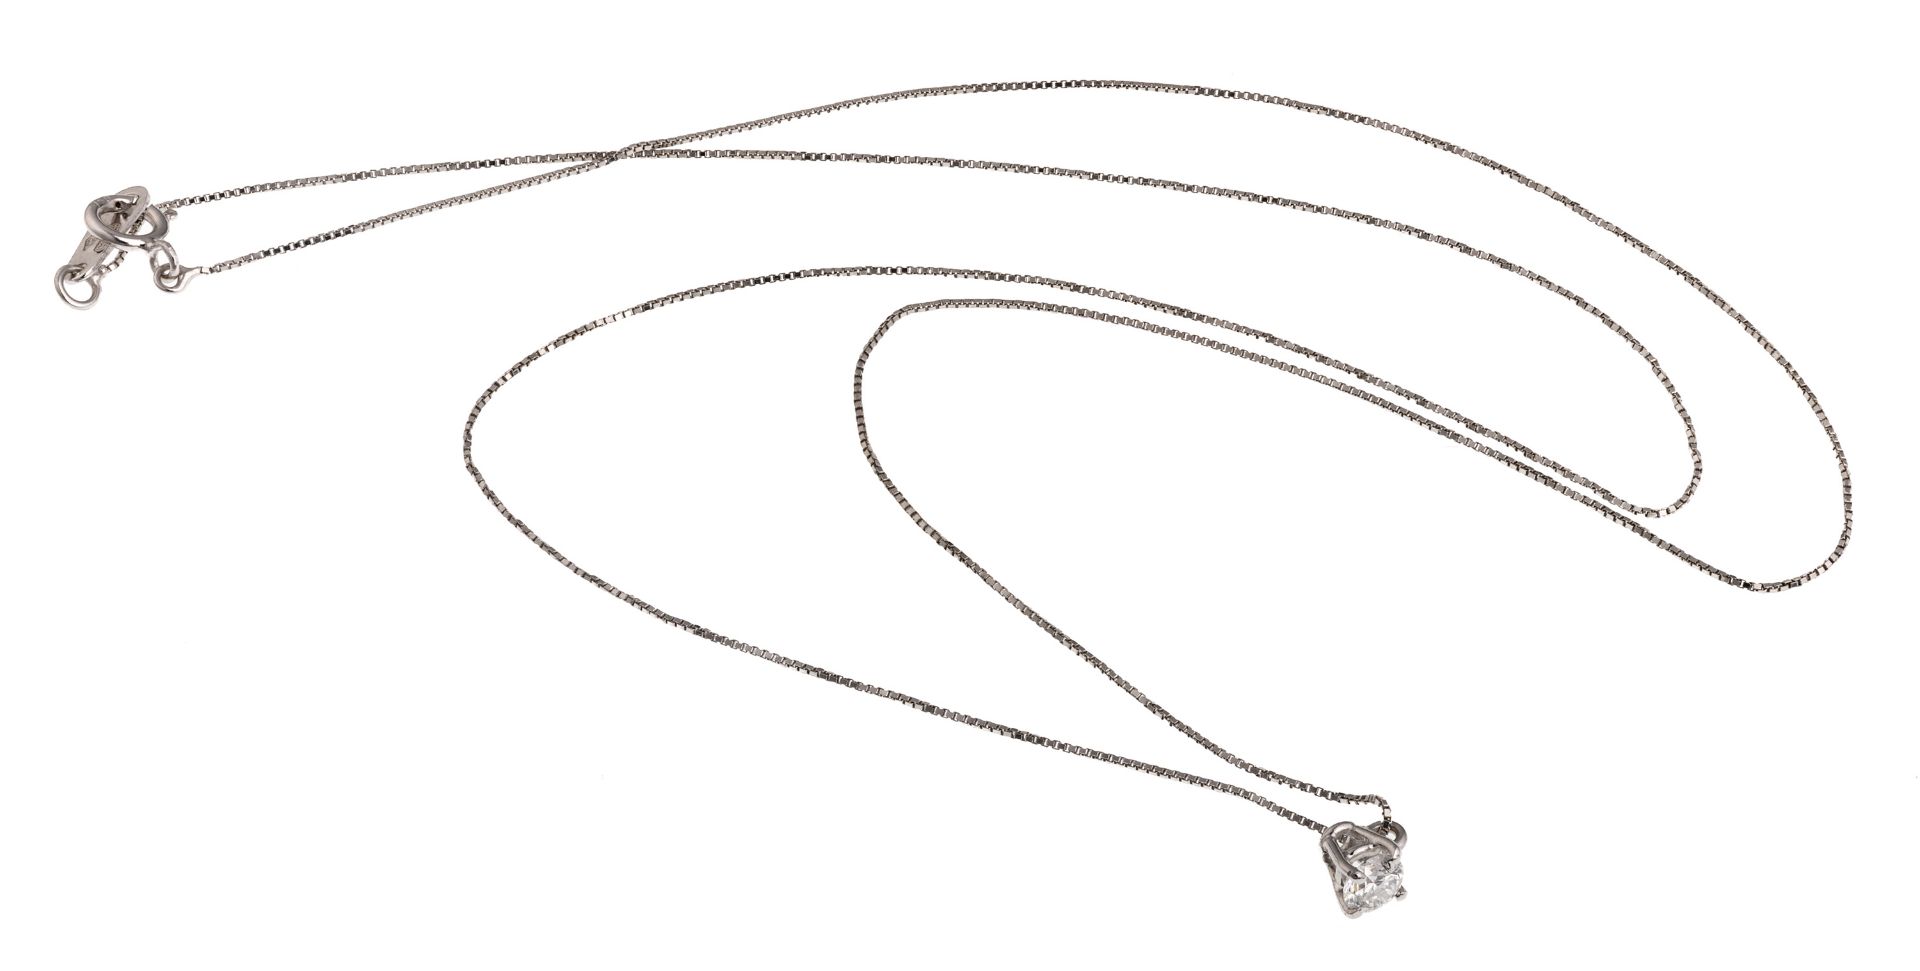 WHITE GOLD NECKLACE WITH DIAMOND PENDANT